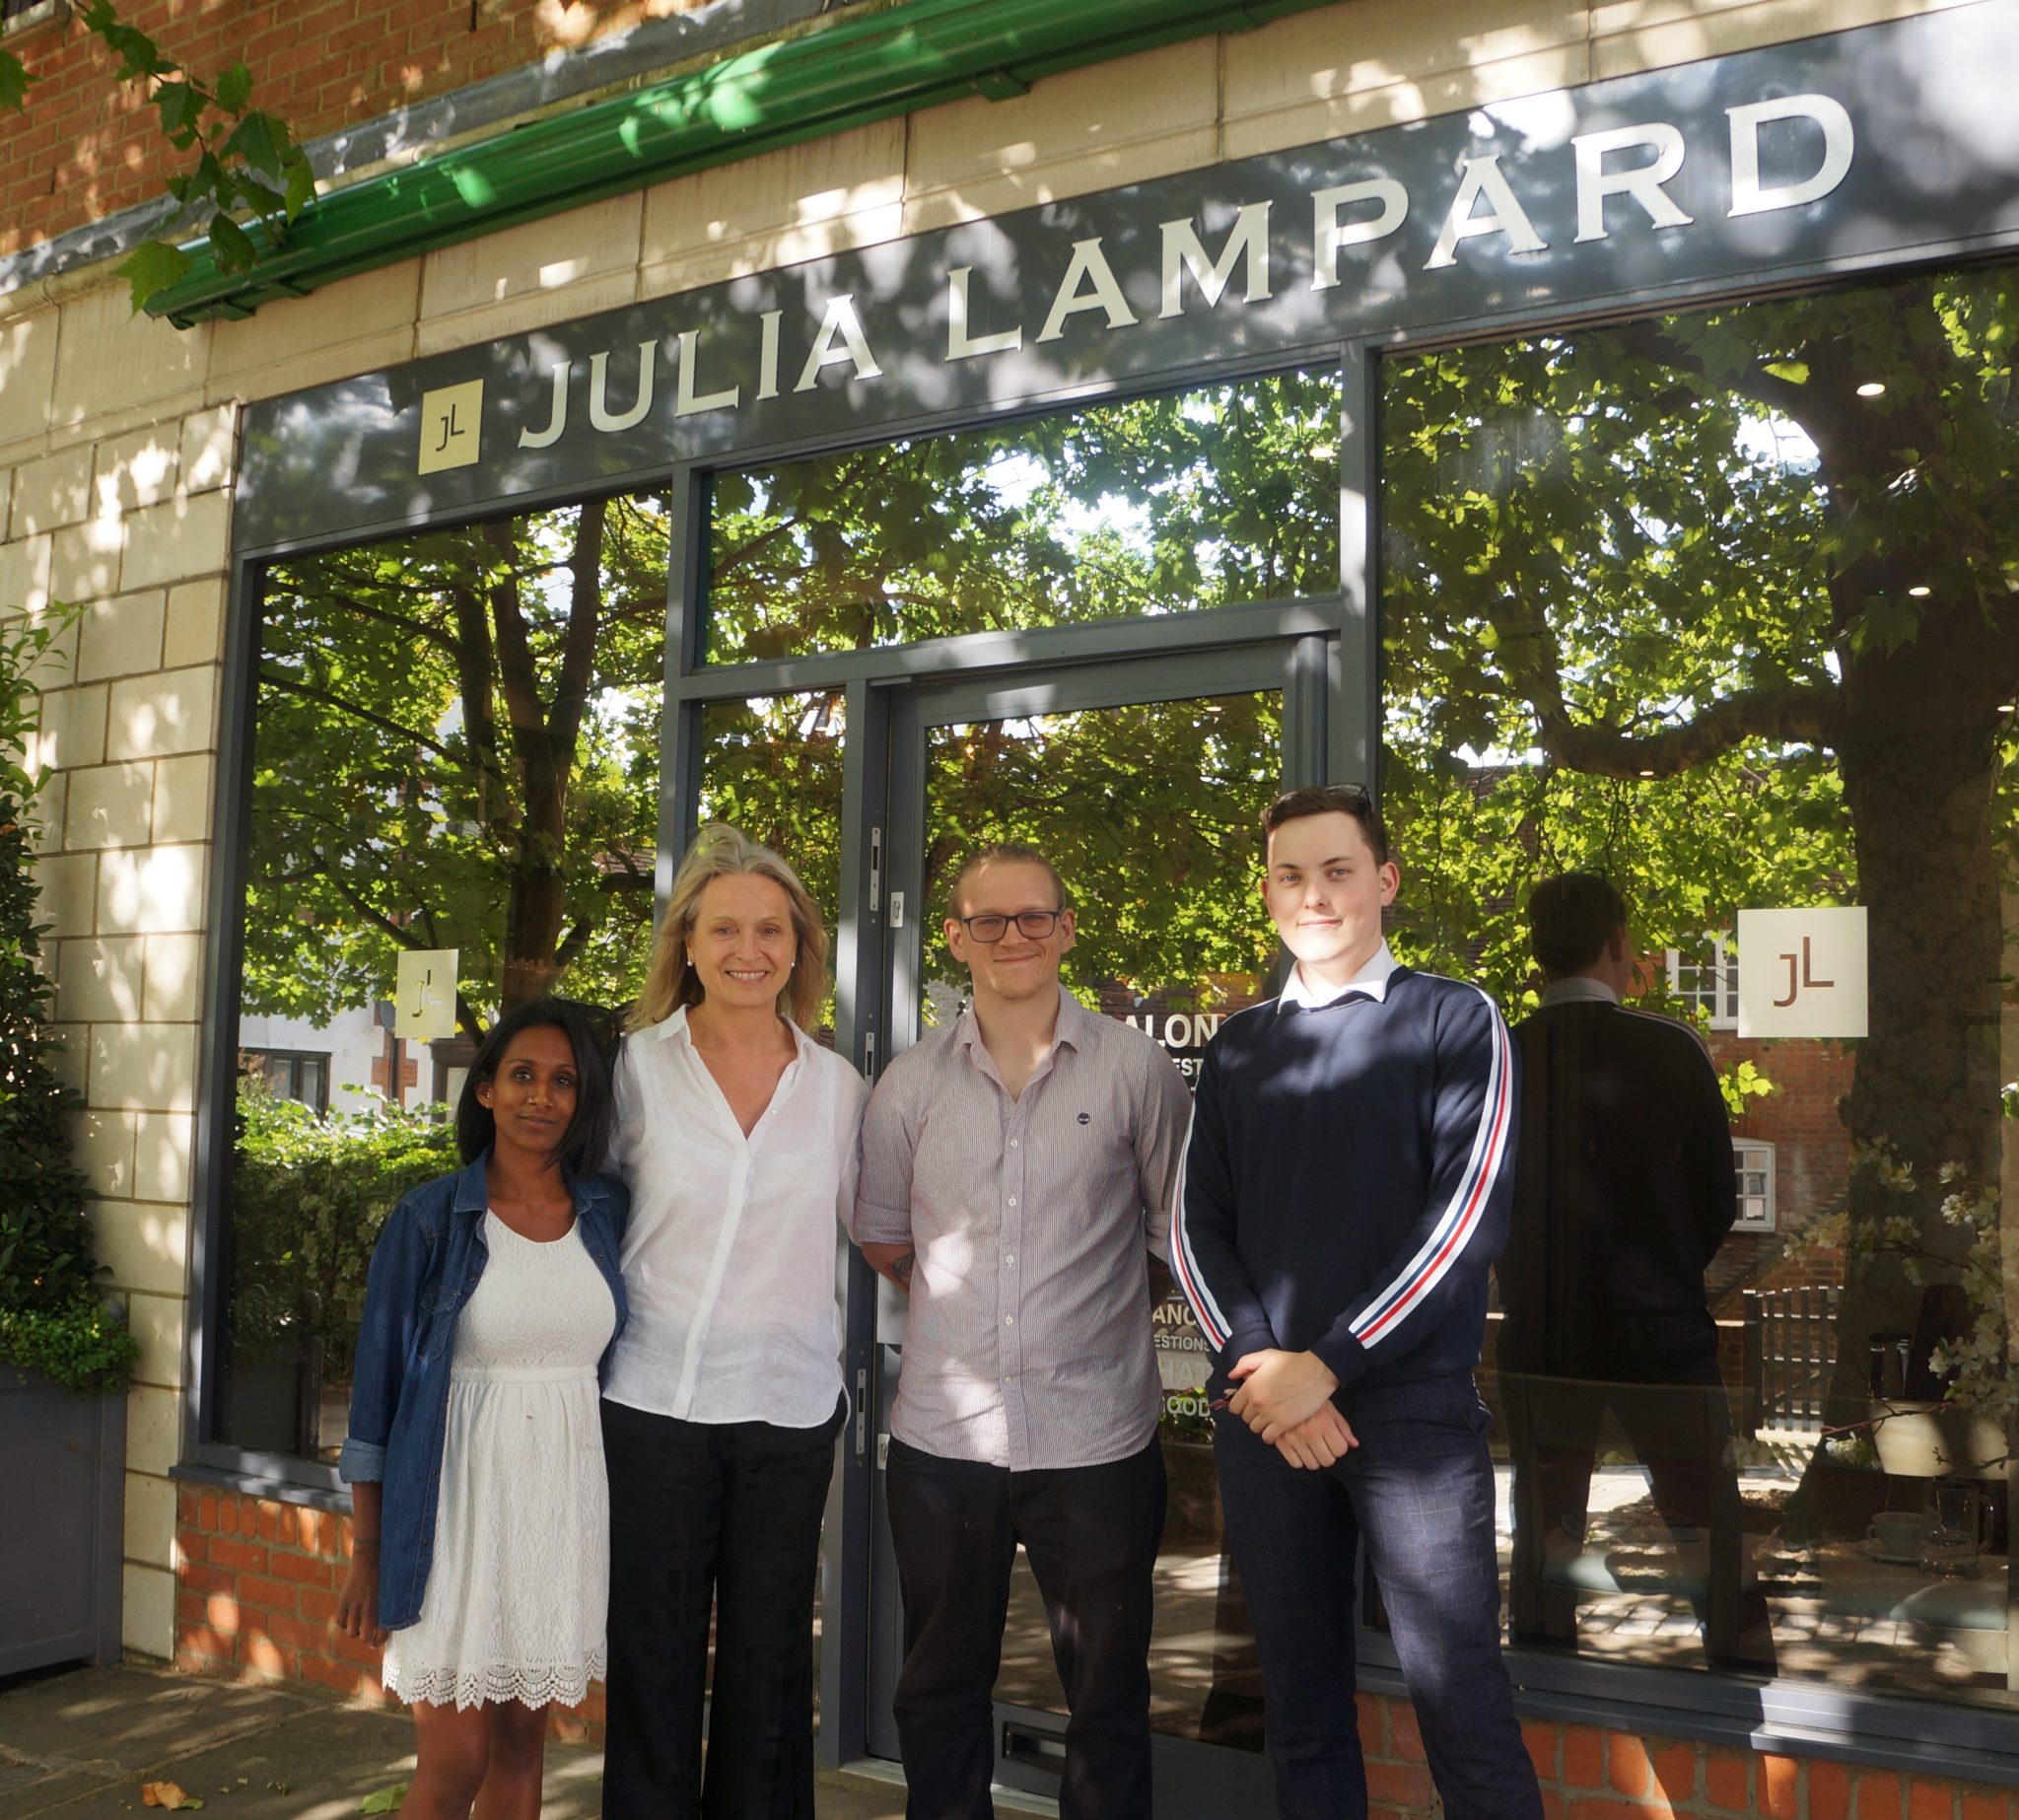 Julia Lampard, second from the left with hair stylists Megan Deutsch and Marcin Lisowski and receptionist, Josh Forster outside the Julia Lampard salon.